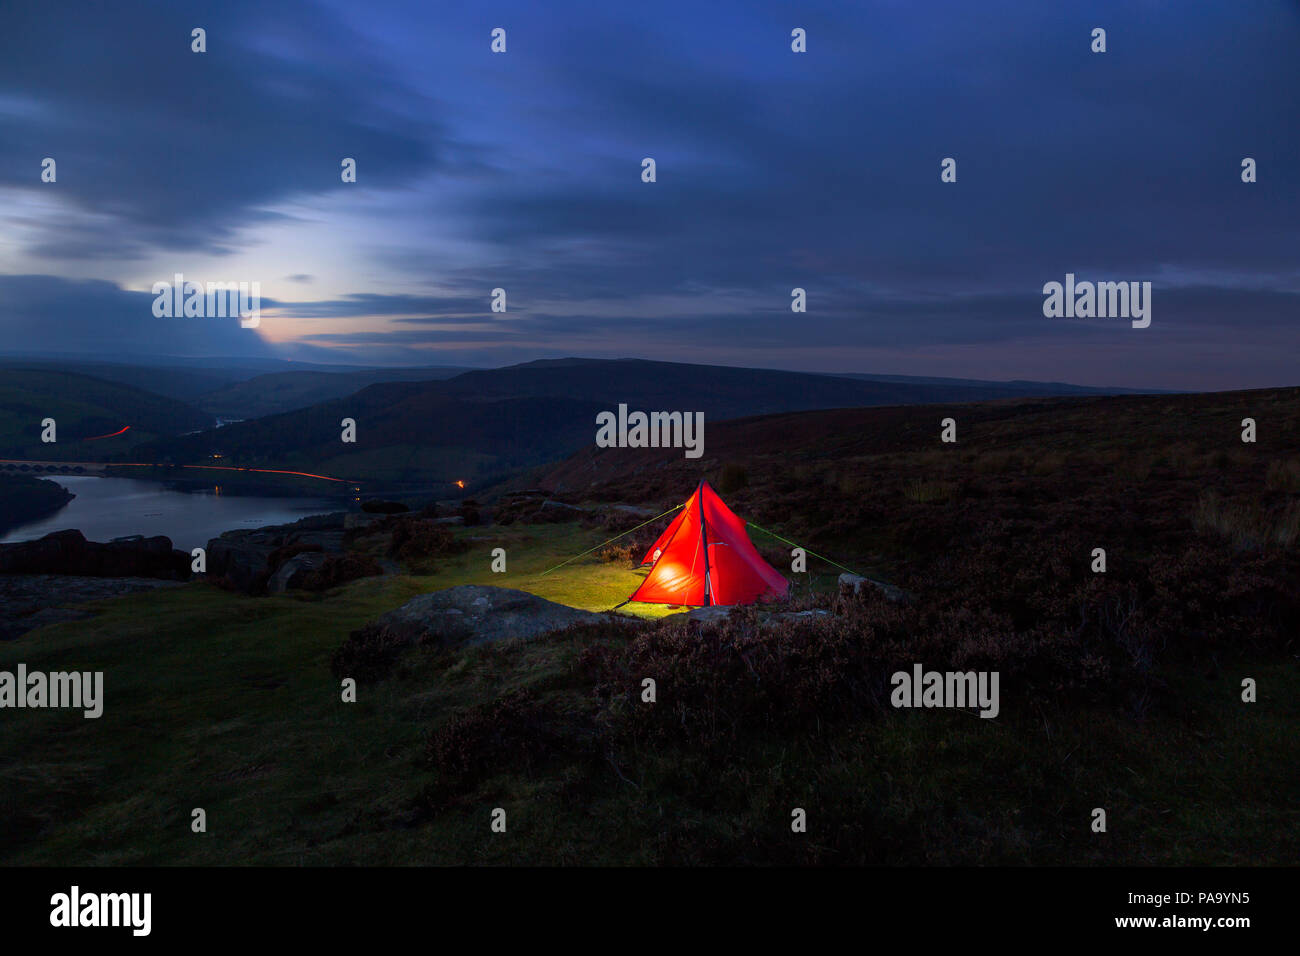 One Man Backpacker Tent Lit up, Camping on Bamford Edge in Peak District National Park, Derbyshire, England, UK Stock Photo